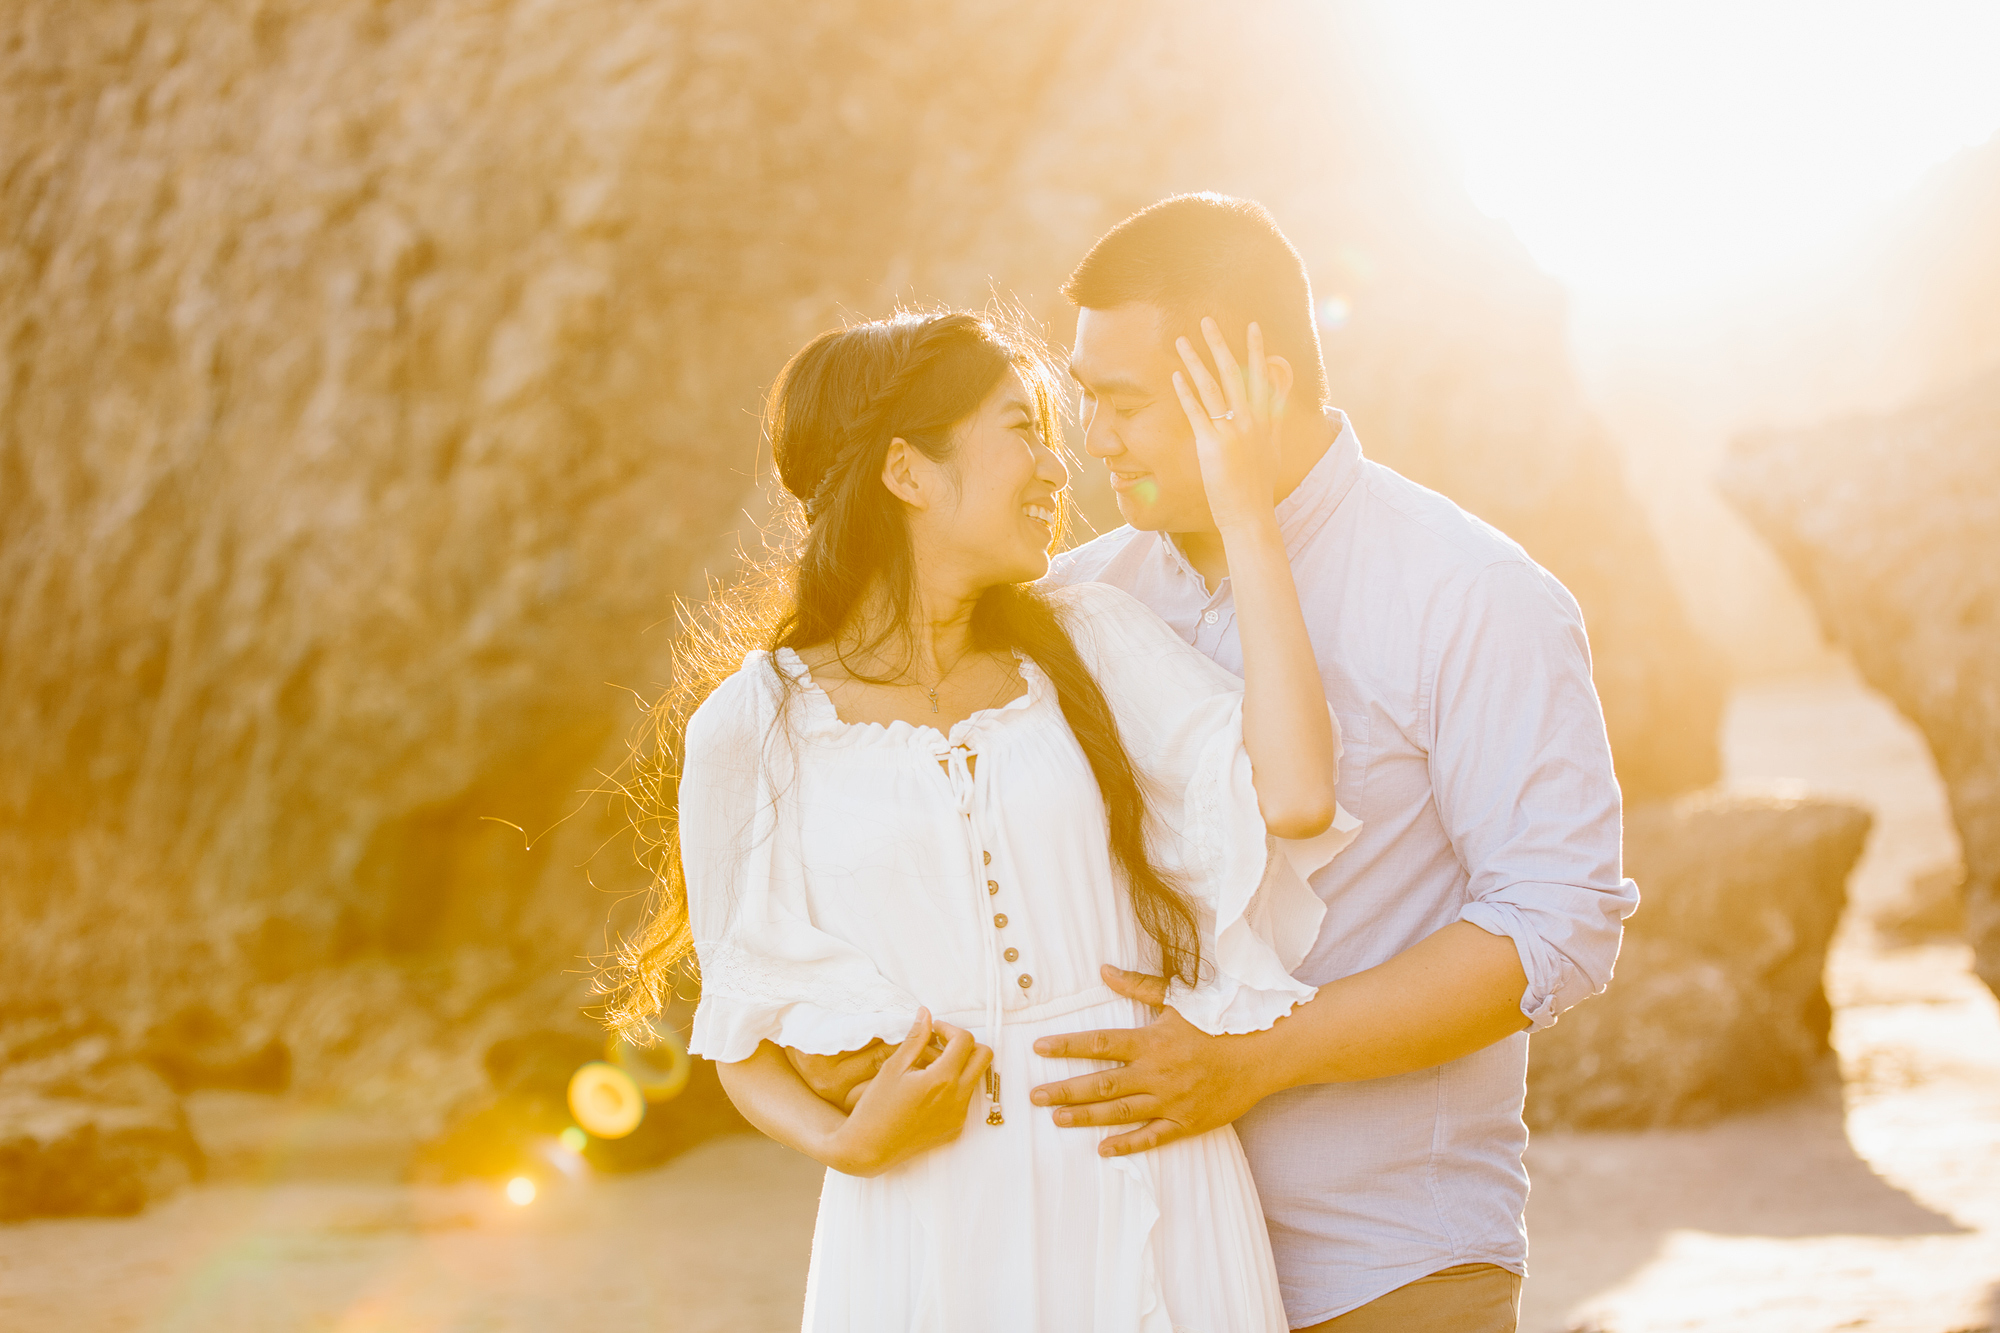 sunkissed engagement photo, groom behind bride to be and she's looking back as the sun shines through